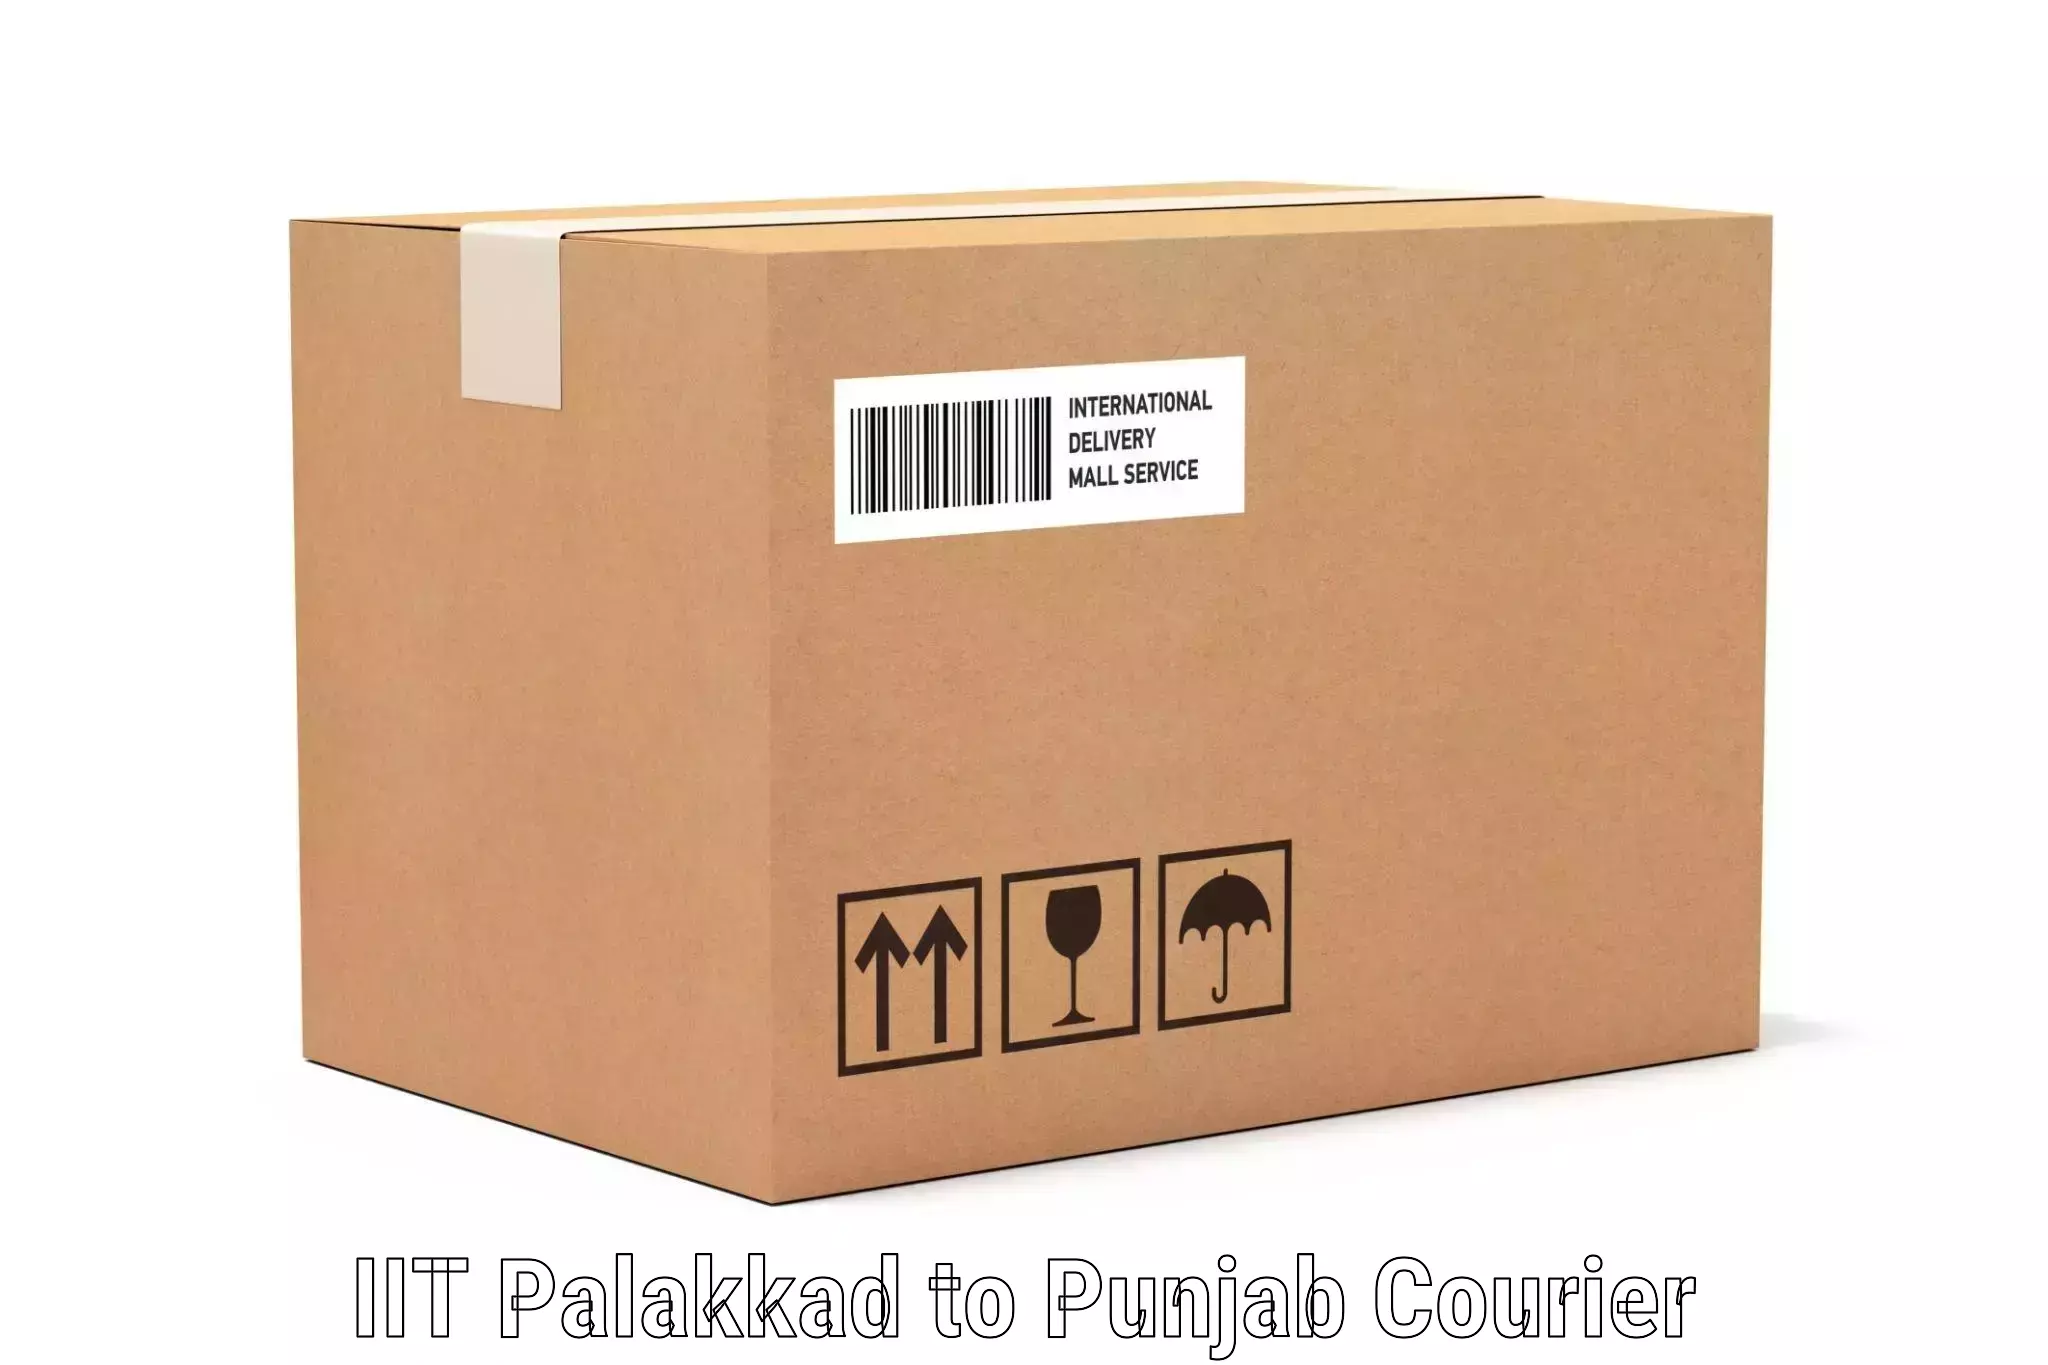 Luggage shipping specialists IIT Palakkad to Pathankot